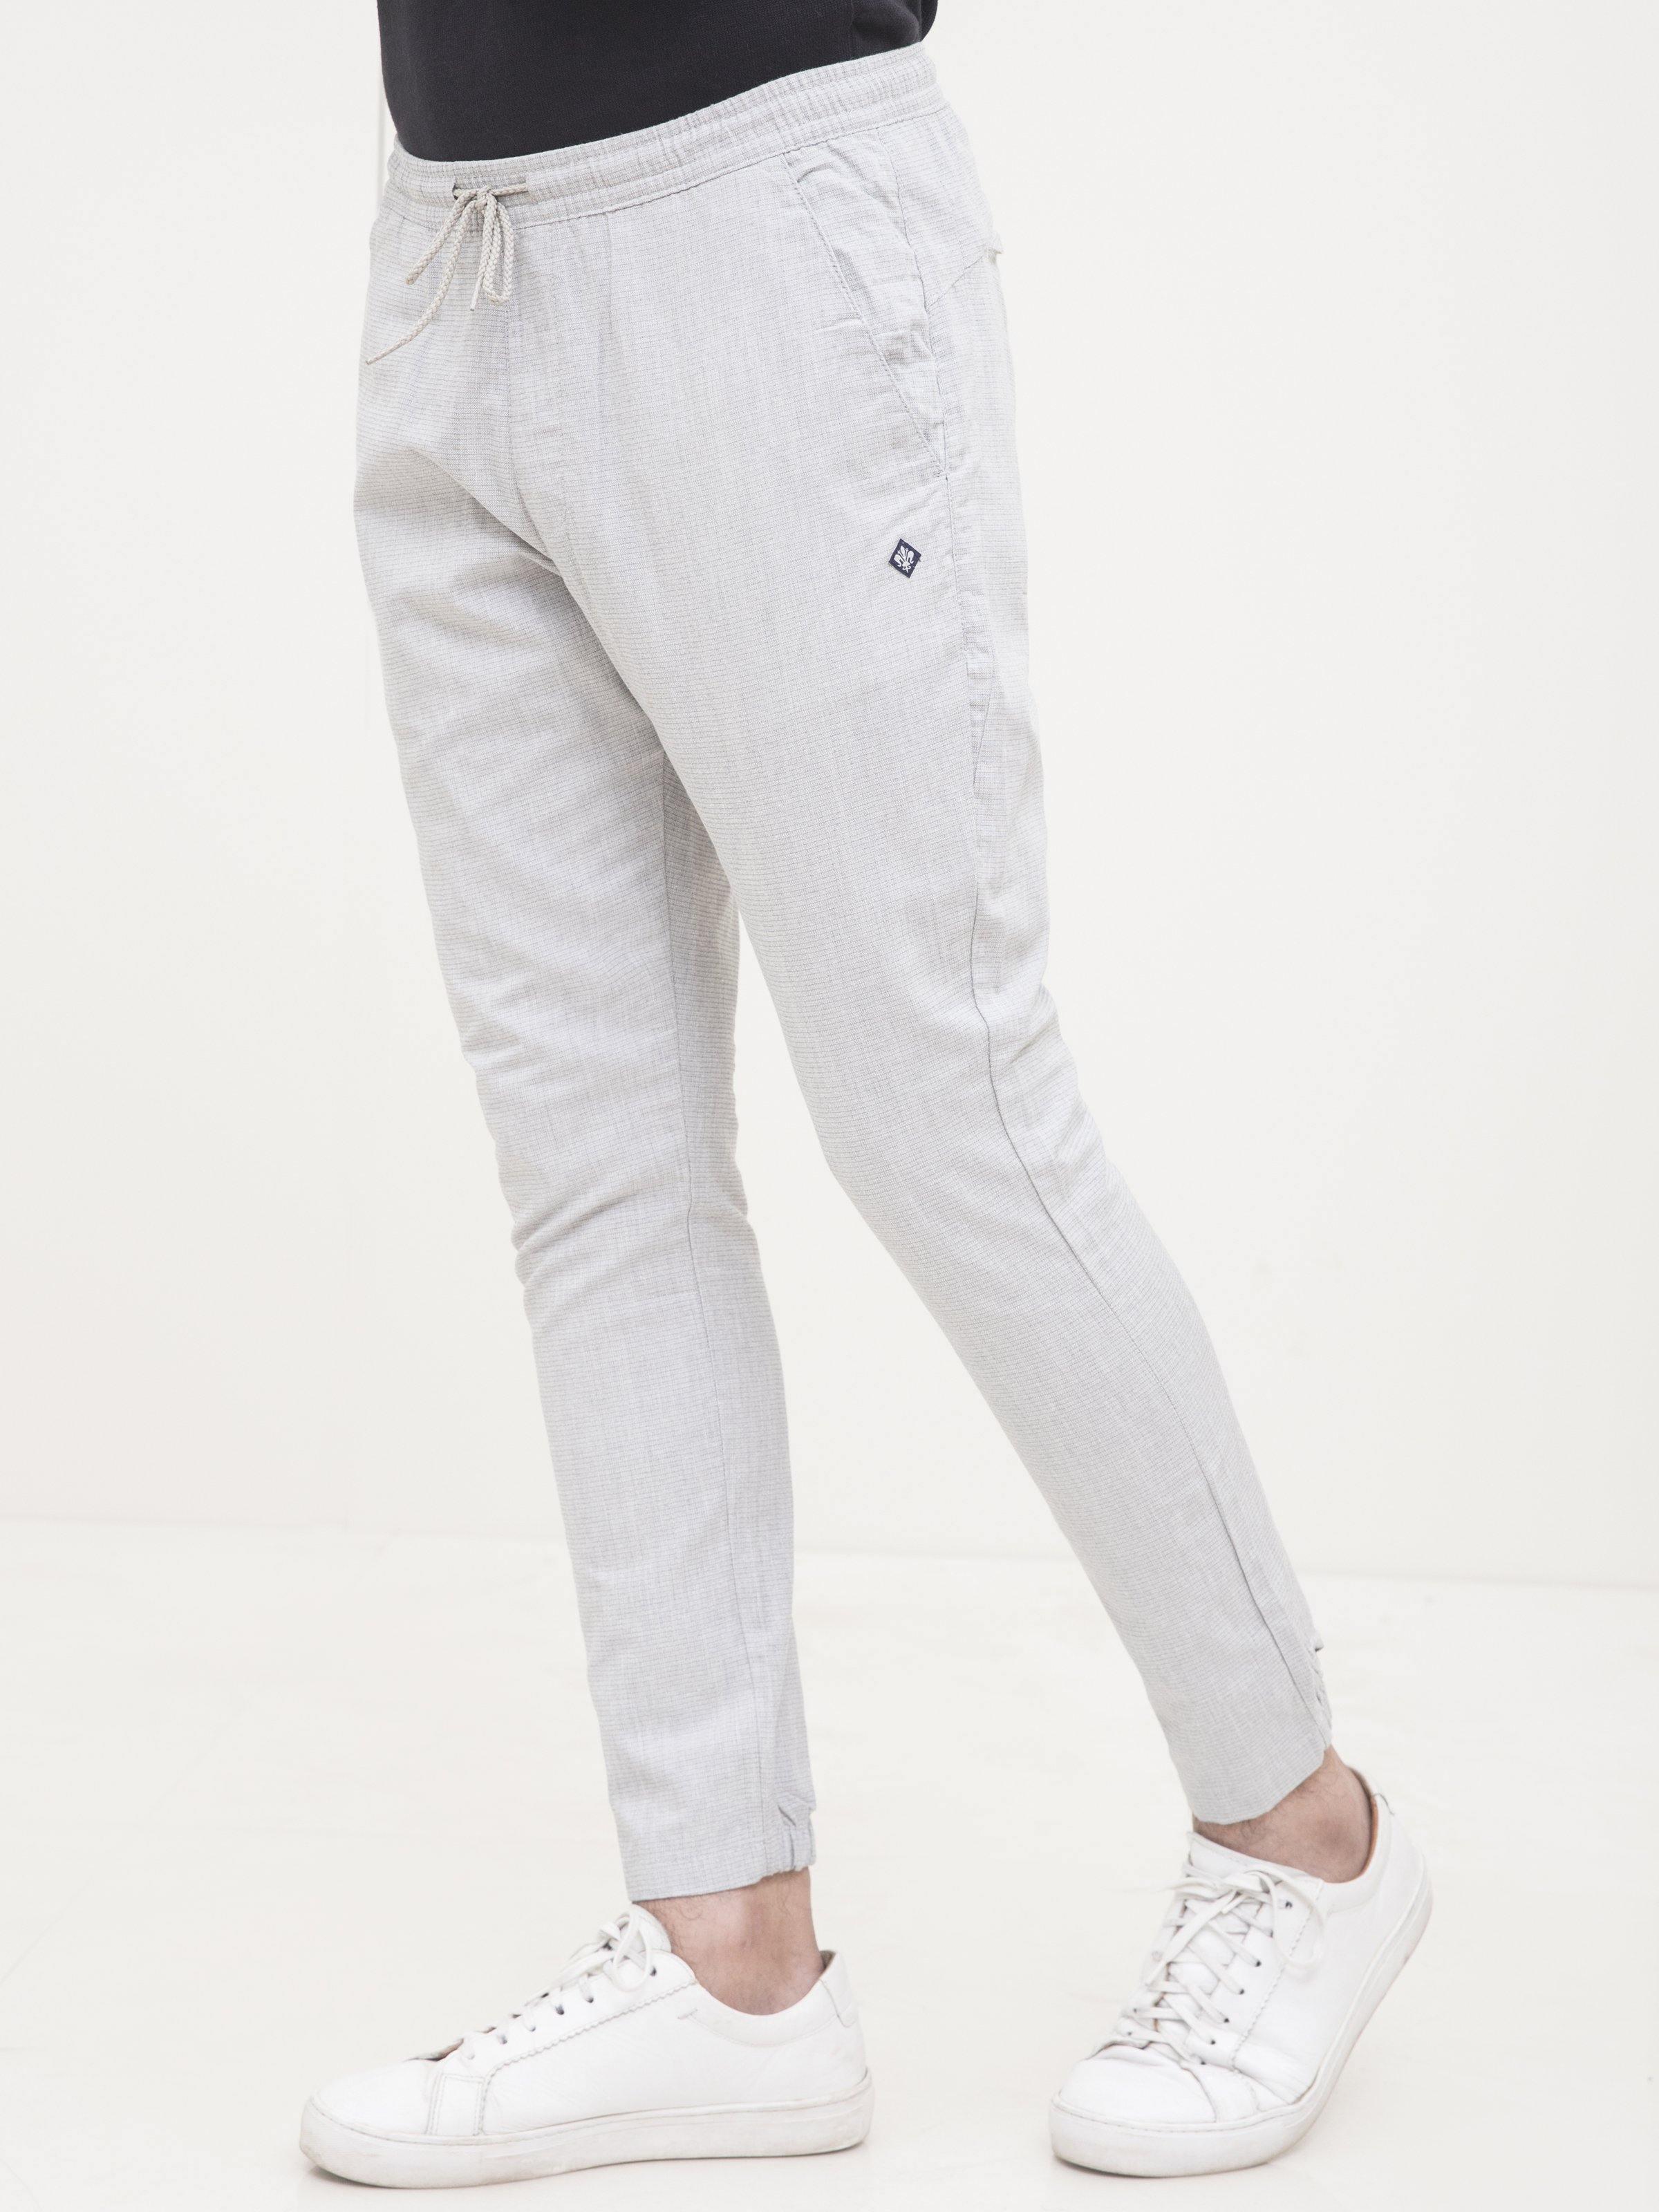 SELF TEXTURED CASUAL TROUSER GREY WHITE at Charcoal Clothing